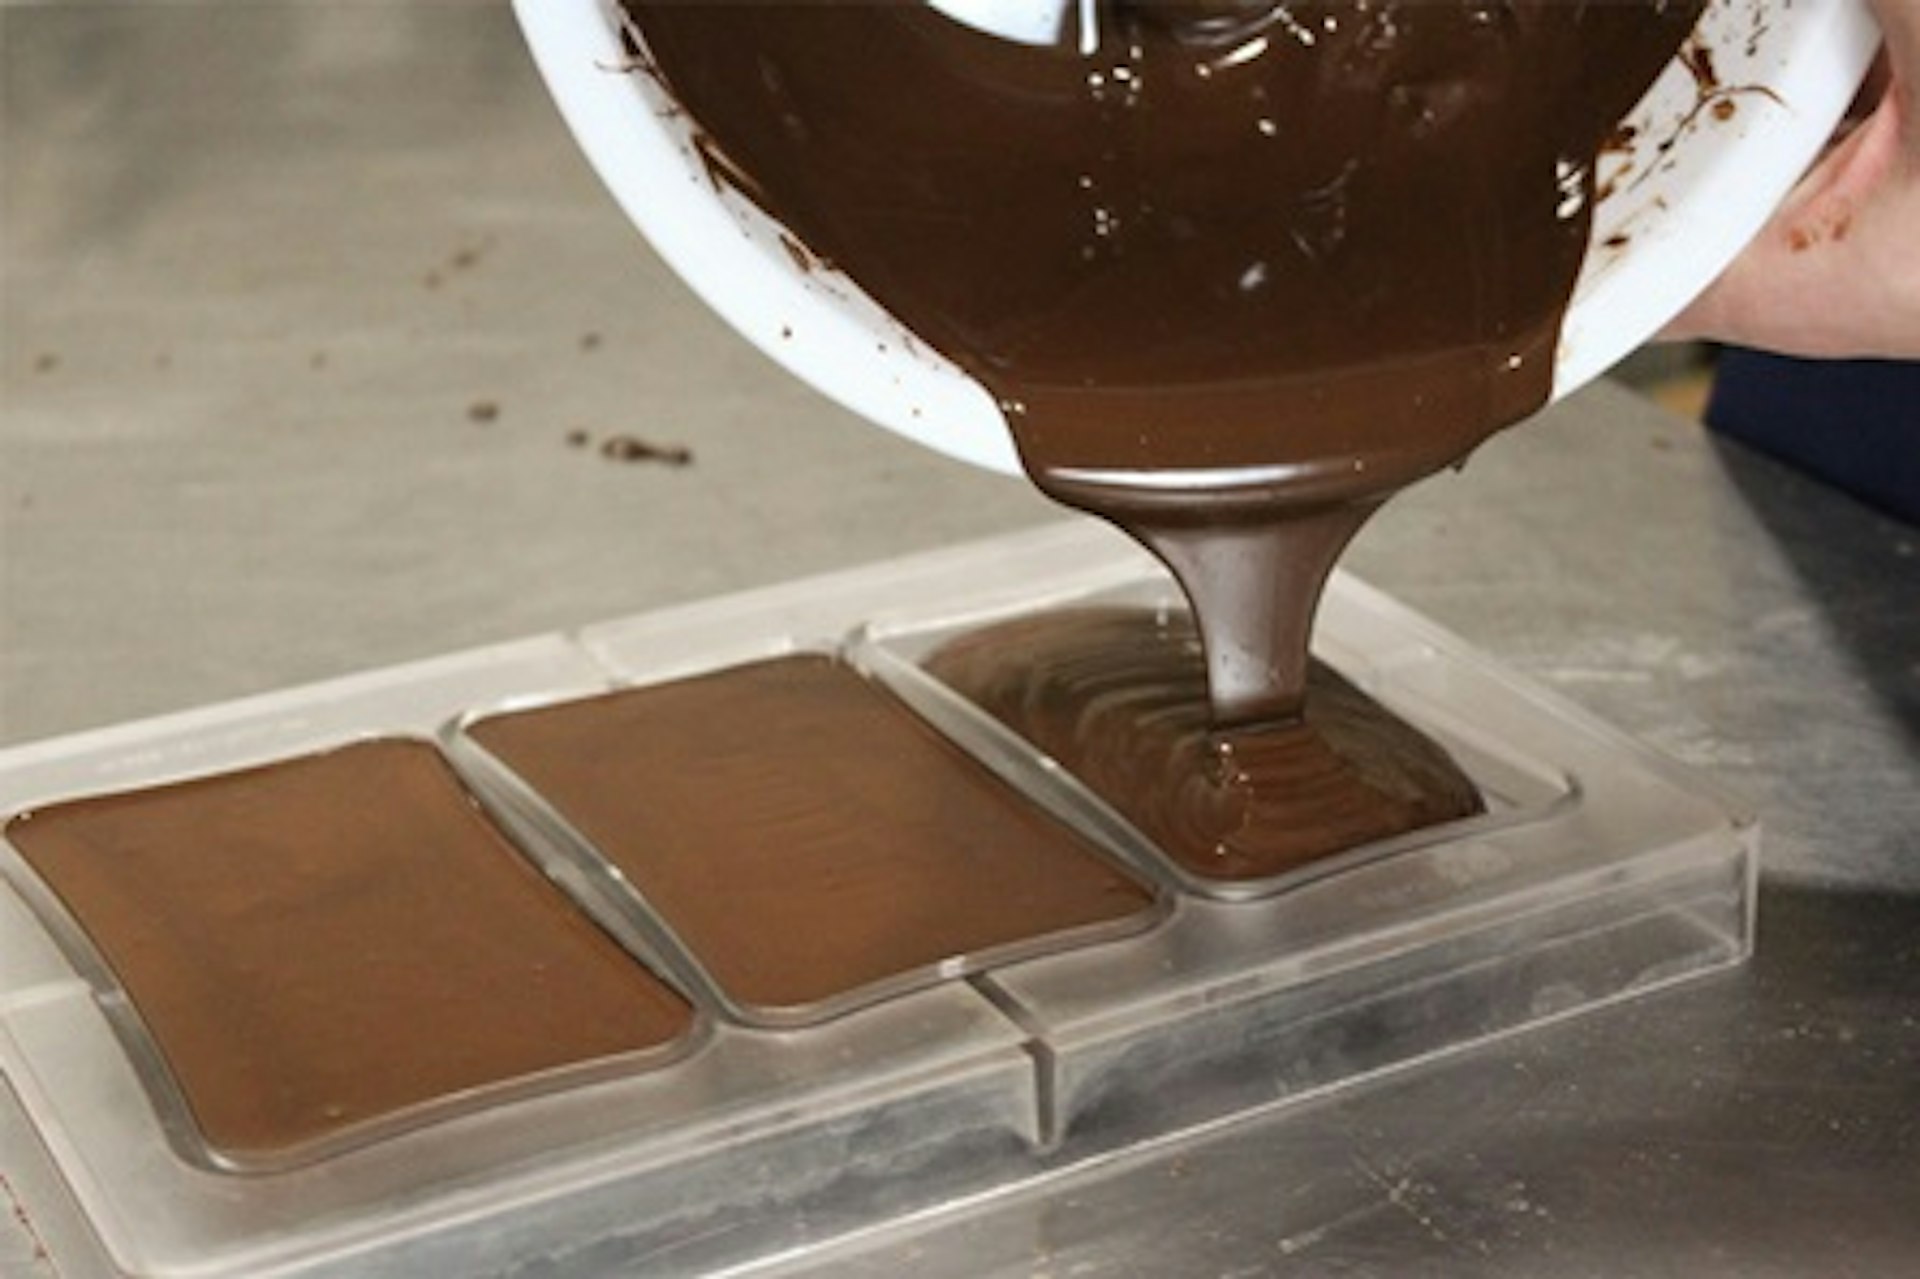 Chocolate Bar Making Workshop for Two at York Cocoa Works 3